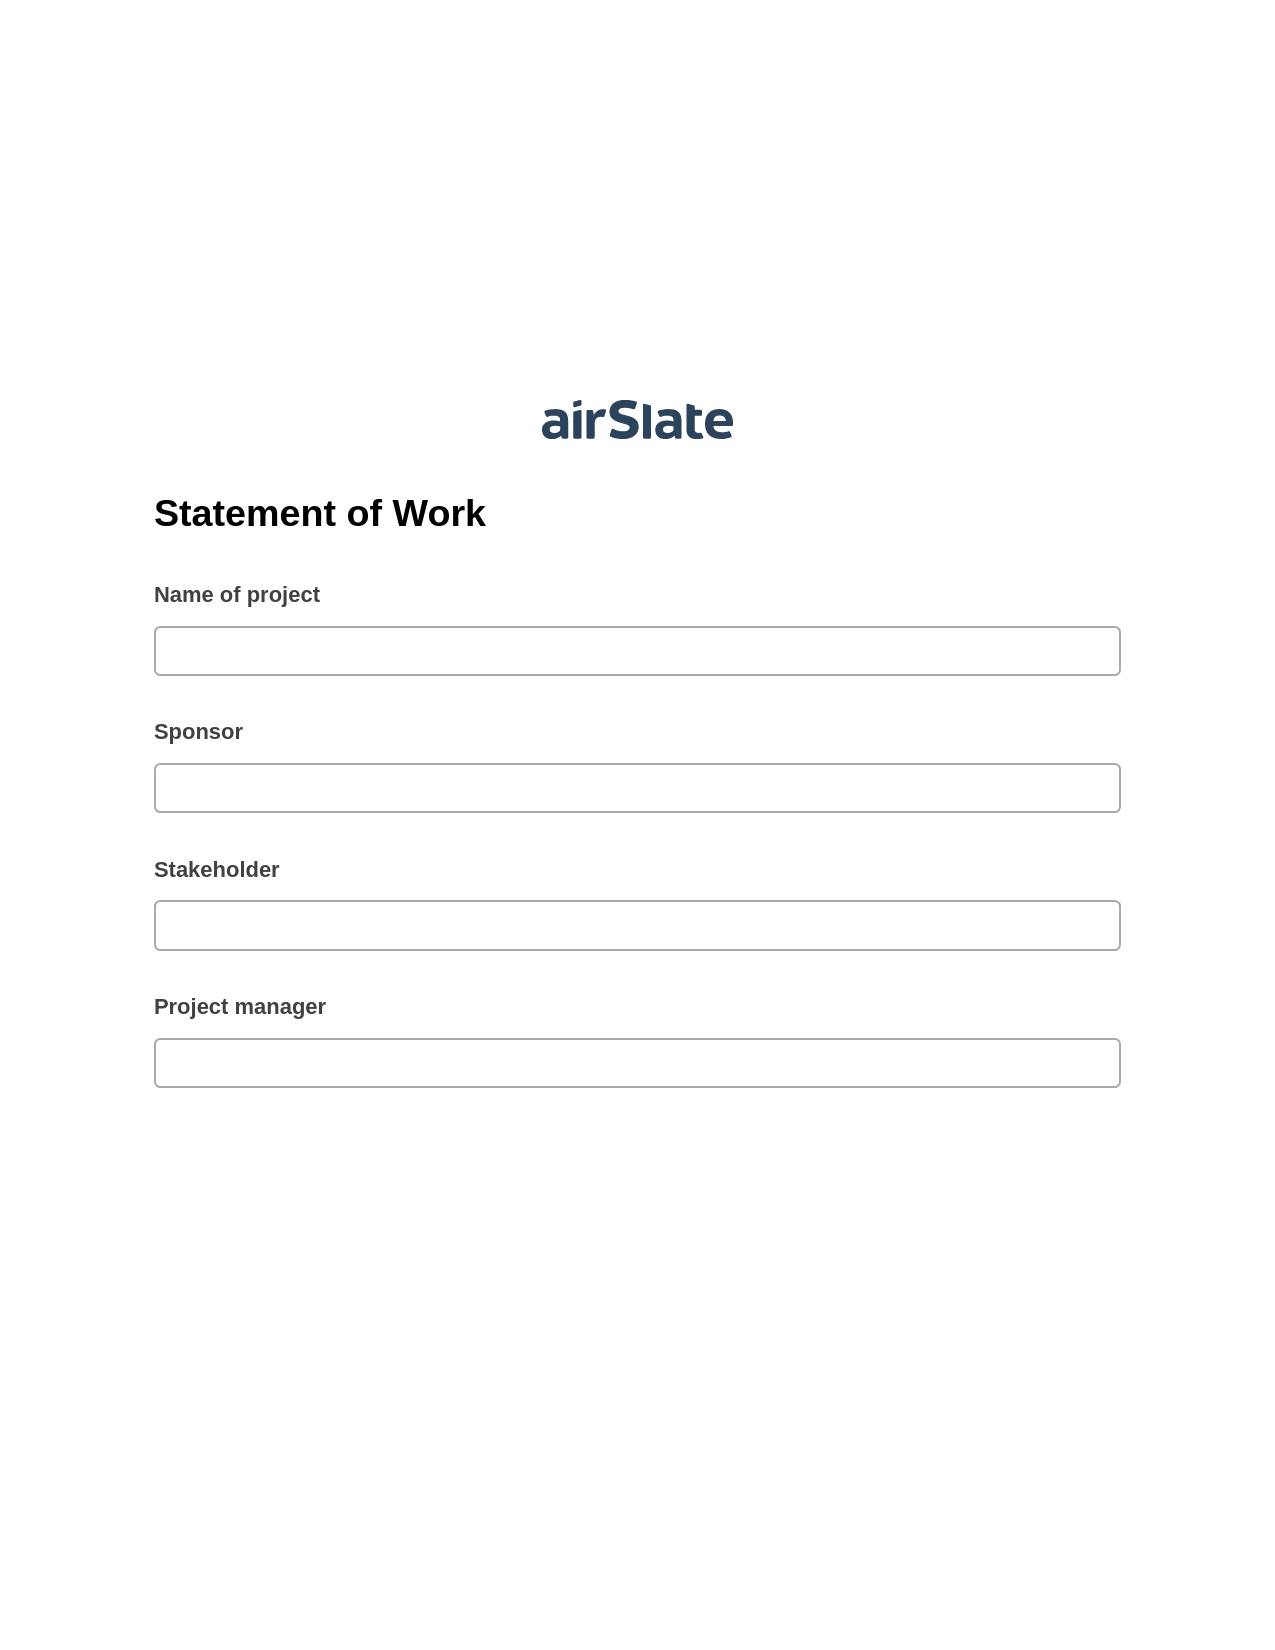 Statement of Work Pre-fill from another Slate Bot, Create Salesforce Record Bot, Google Drive Bot